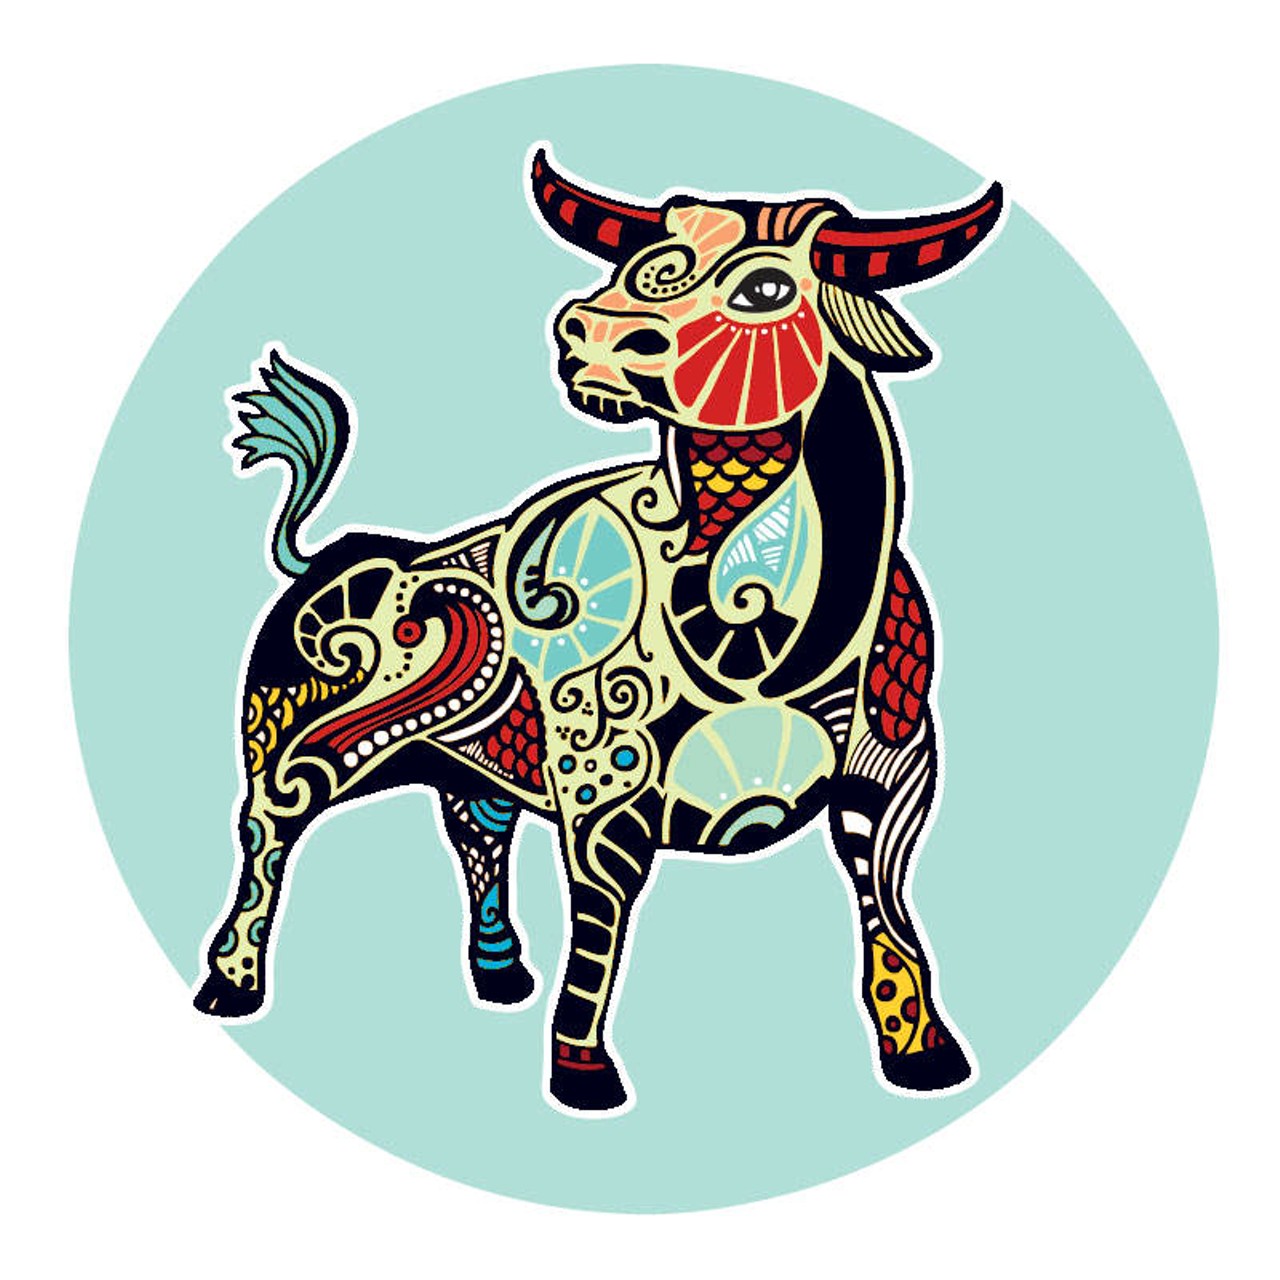 TAURUS (April 21 -May 20): 
Everyone&#146;s nice until you get to know them! You are getting some hard lessons in what happens when we give people more credit than they deserve. That&#146;s OK; now that you know what&#146;s up you won&#146;t make the same mistake again. Beyond that, life is calling you to step into a bigger pair of shoes. As the next few months unwind you&#146;re going to be tested in ways that force you to leave your comfort zone and expand your base of operations. Don&#146;t be afraid to make waves. Your steady nature and your pure intentions will keep your life afloat even as your spirit rocks the boat.